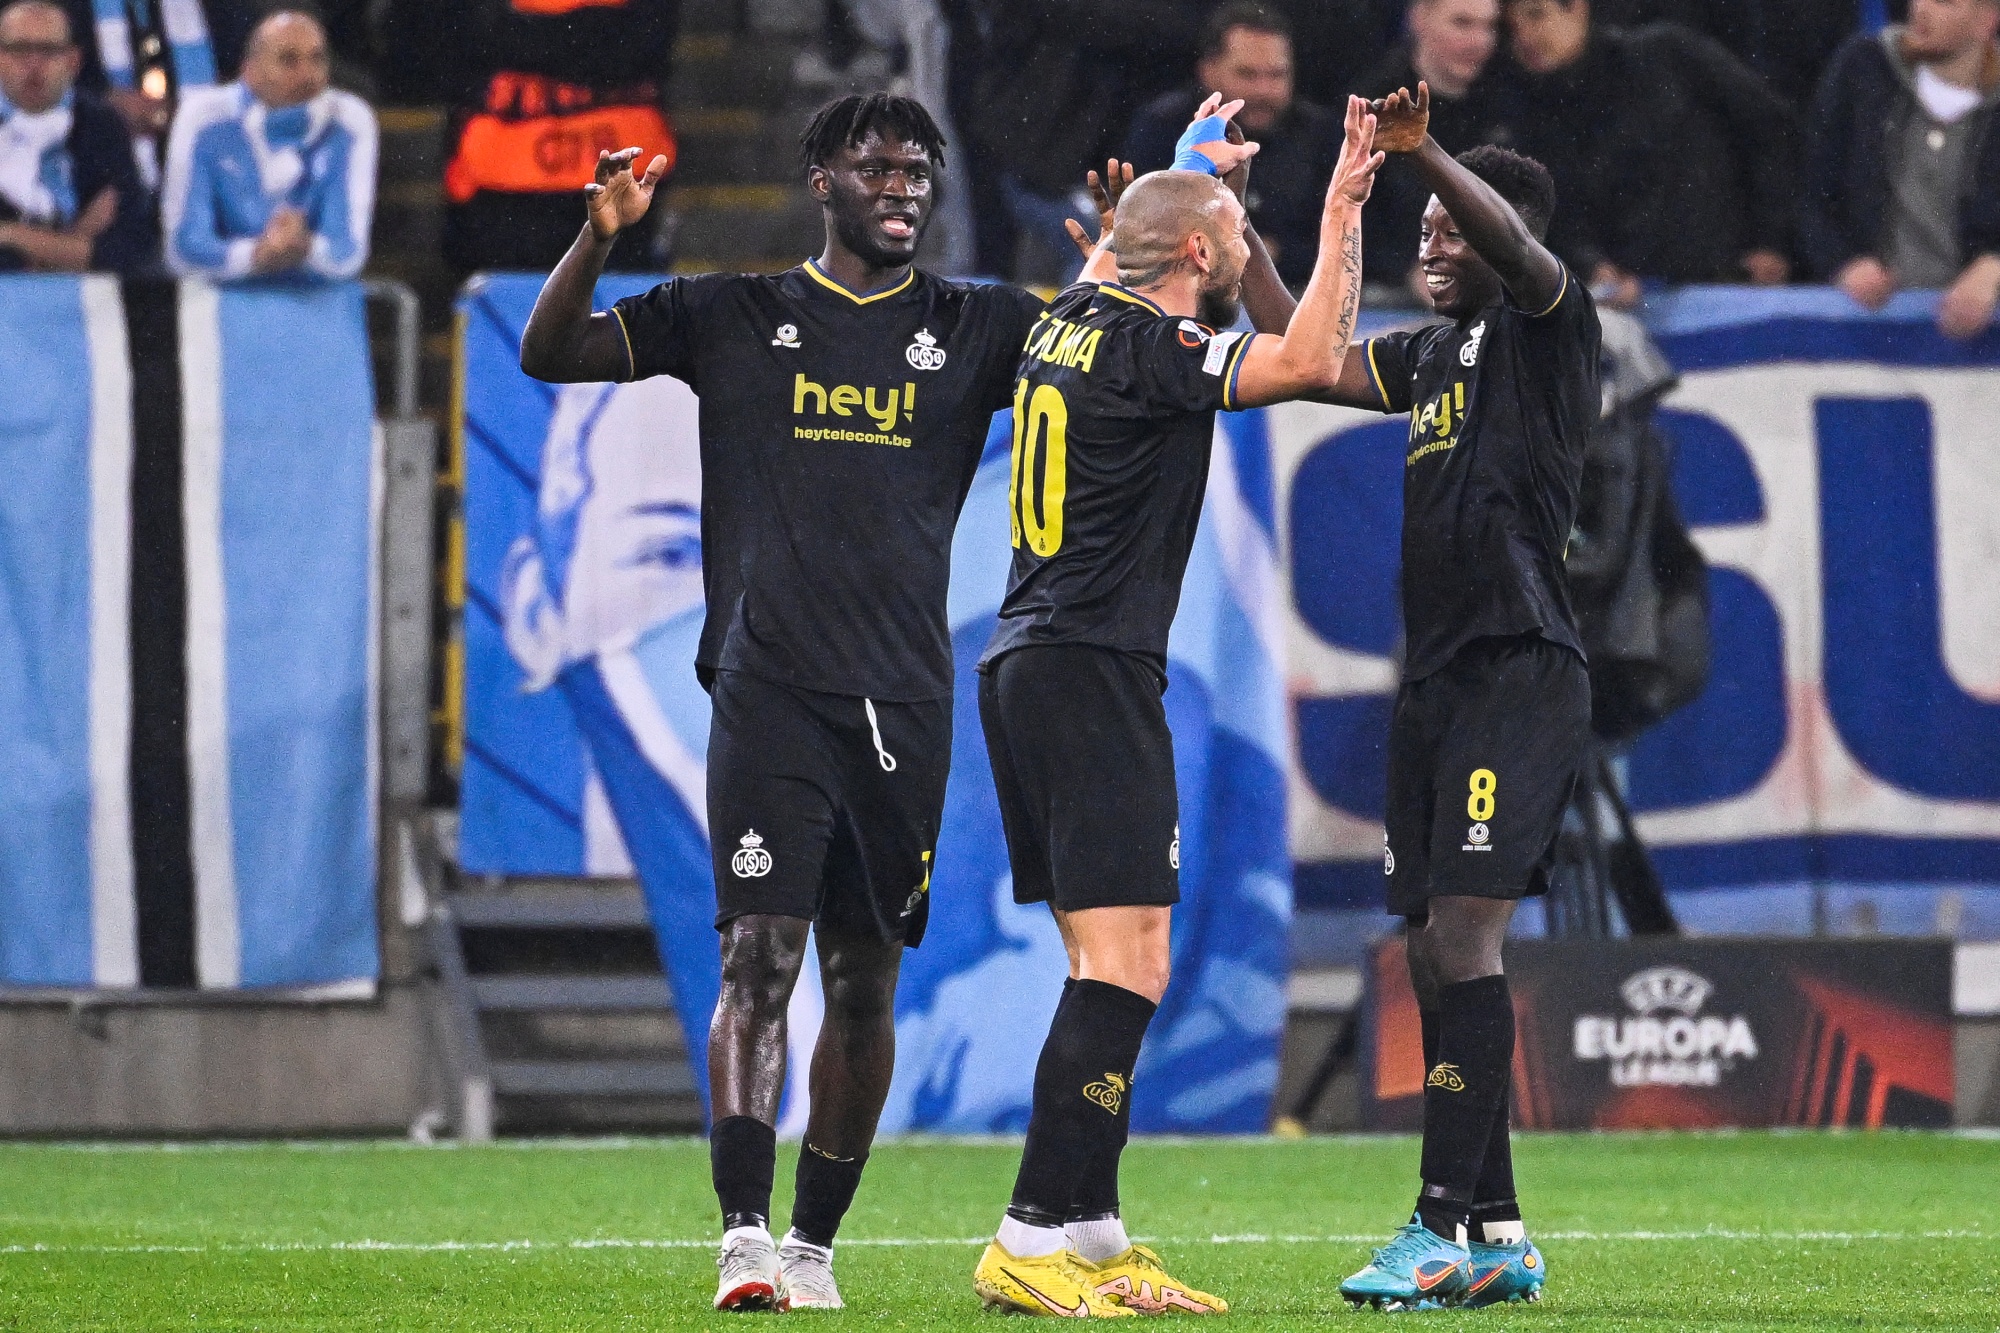 Union's Teddy Teuma celebrates after scoring during a soccer game between Swedish Malmo Fotbollforening and Belgian Royale Union Saint-Gilloise, Thursday 27 October 2022 in Malmo, on day 5 of the UEFA Europa League group stage. BELGA PHOTO LAURIE DIEFFEMBACQ